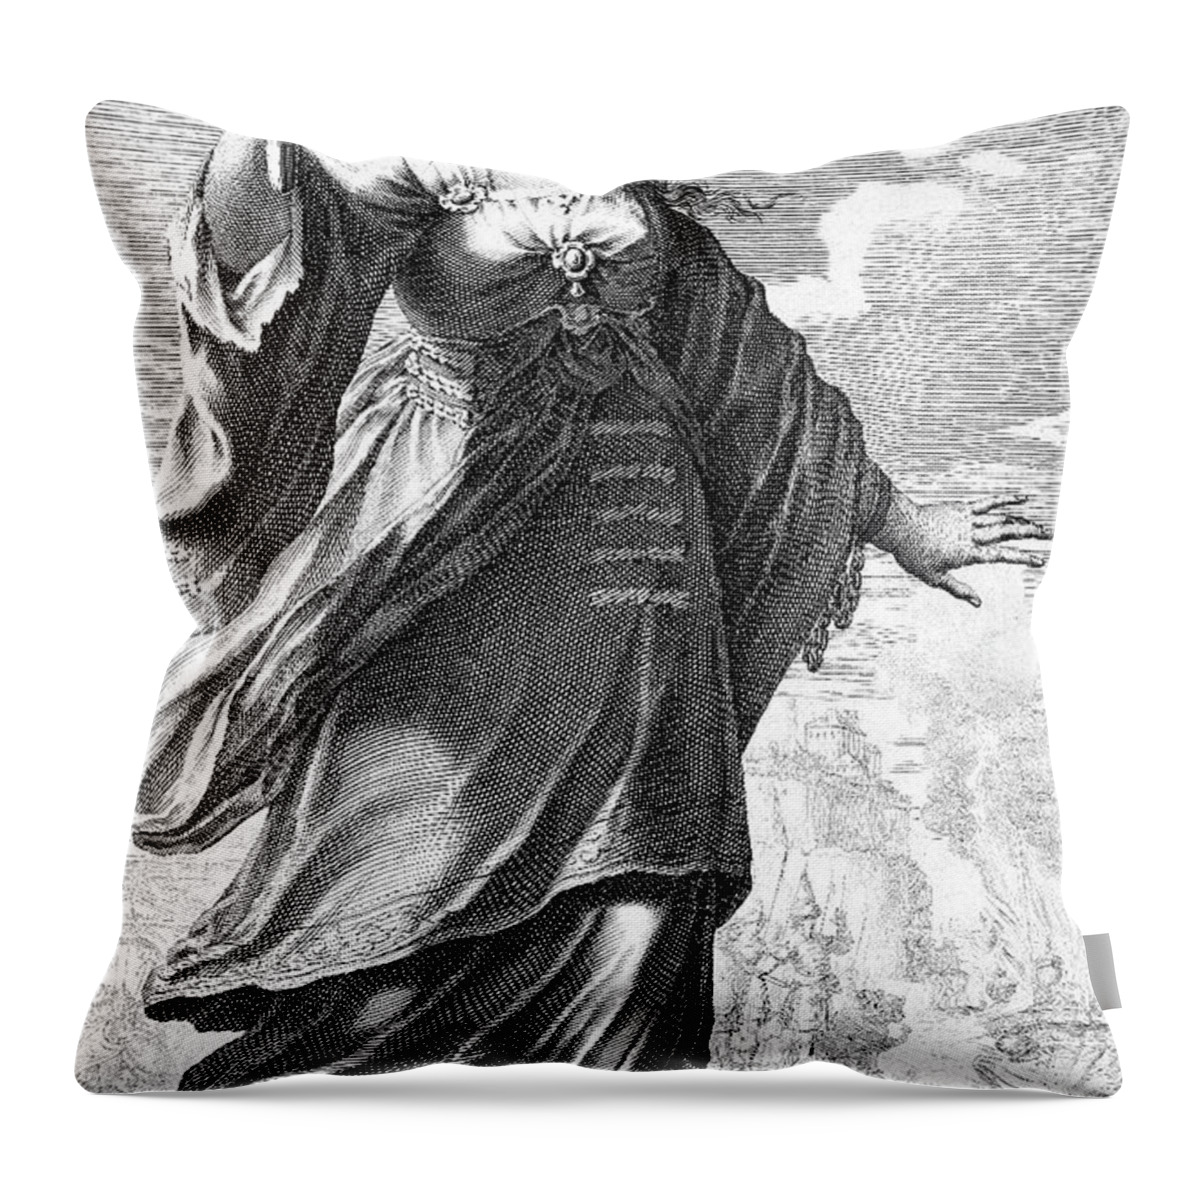 1570s Throw Pillow featuring the photograph Fourth Ottoman-venetian War, Greek by Science Source